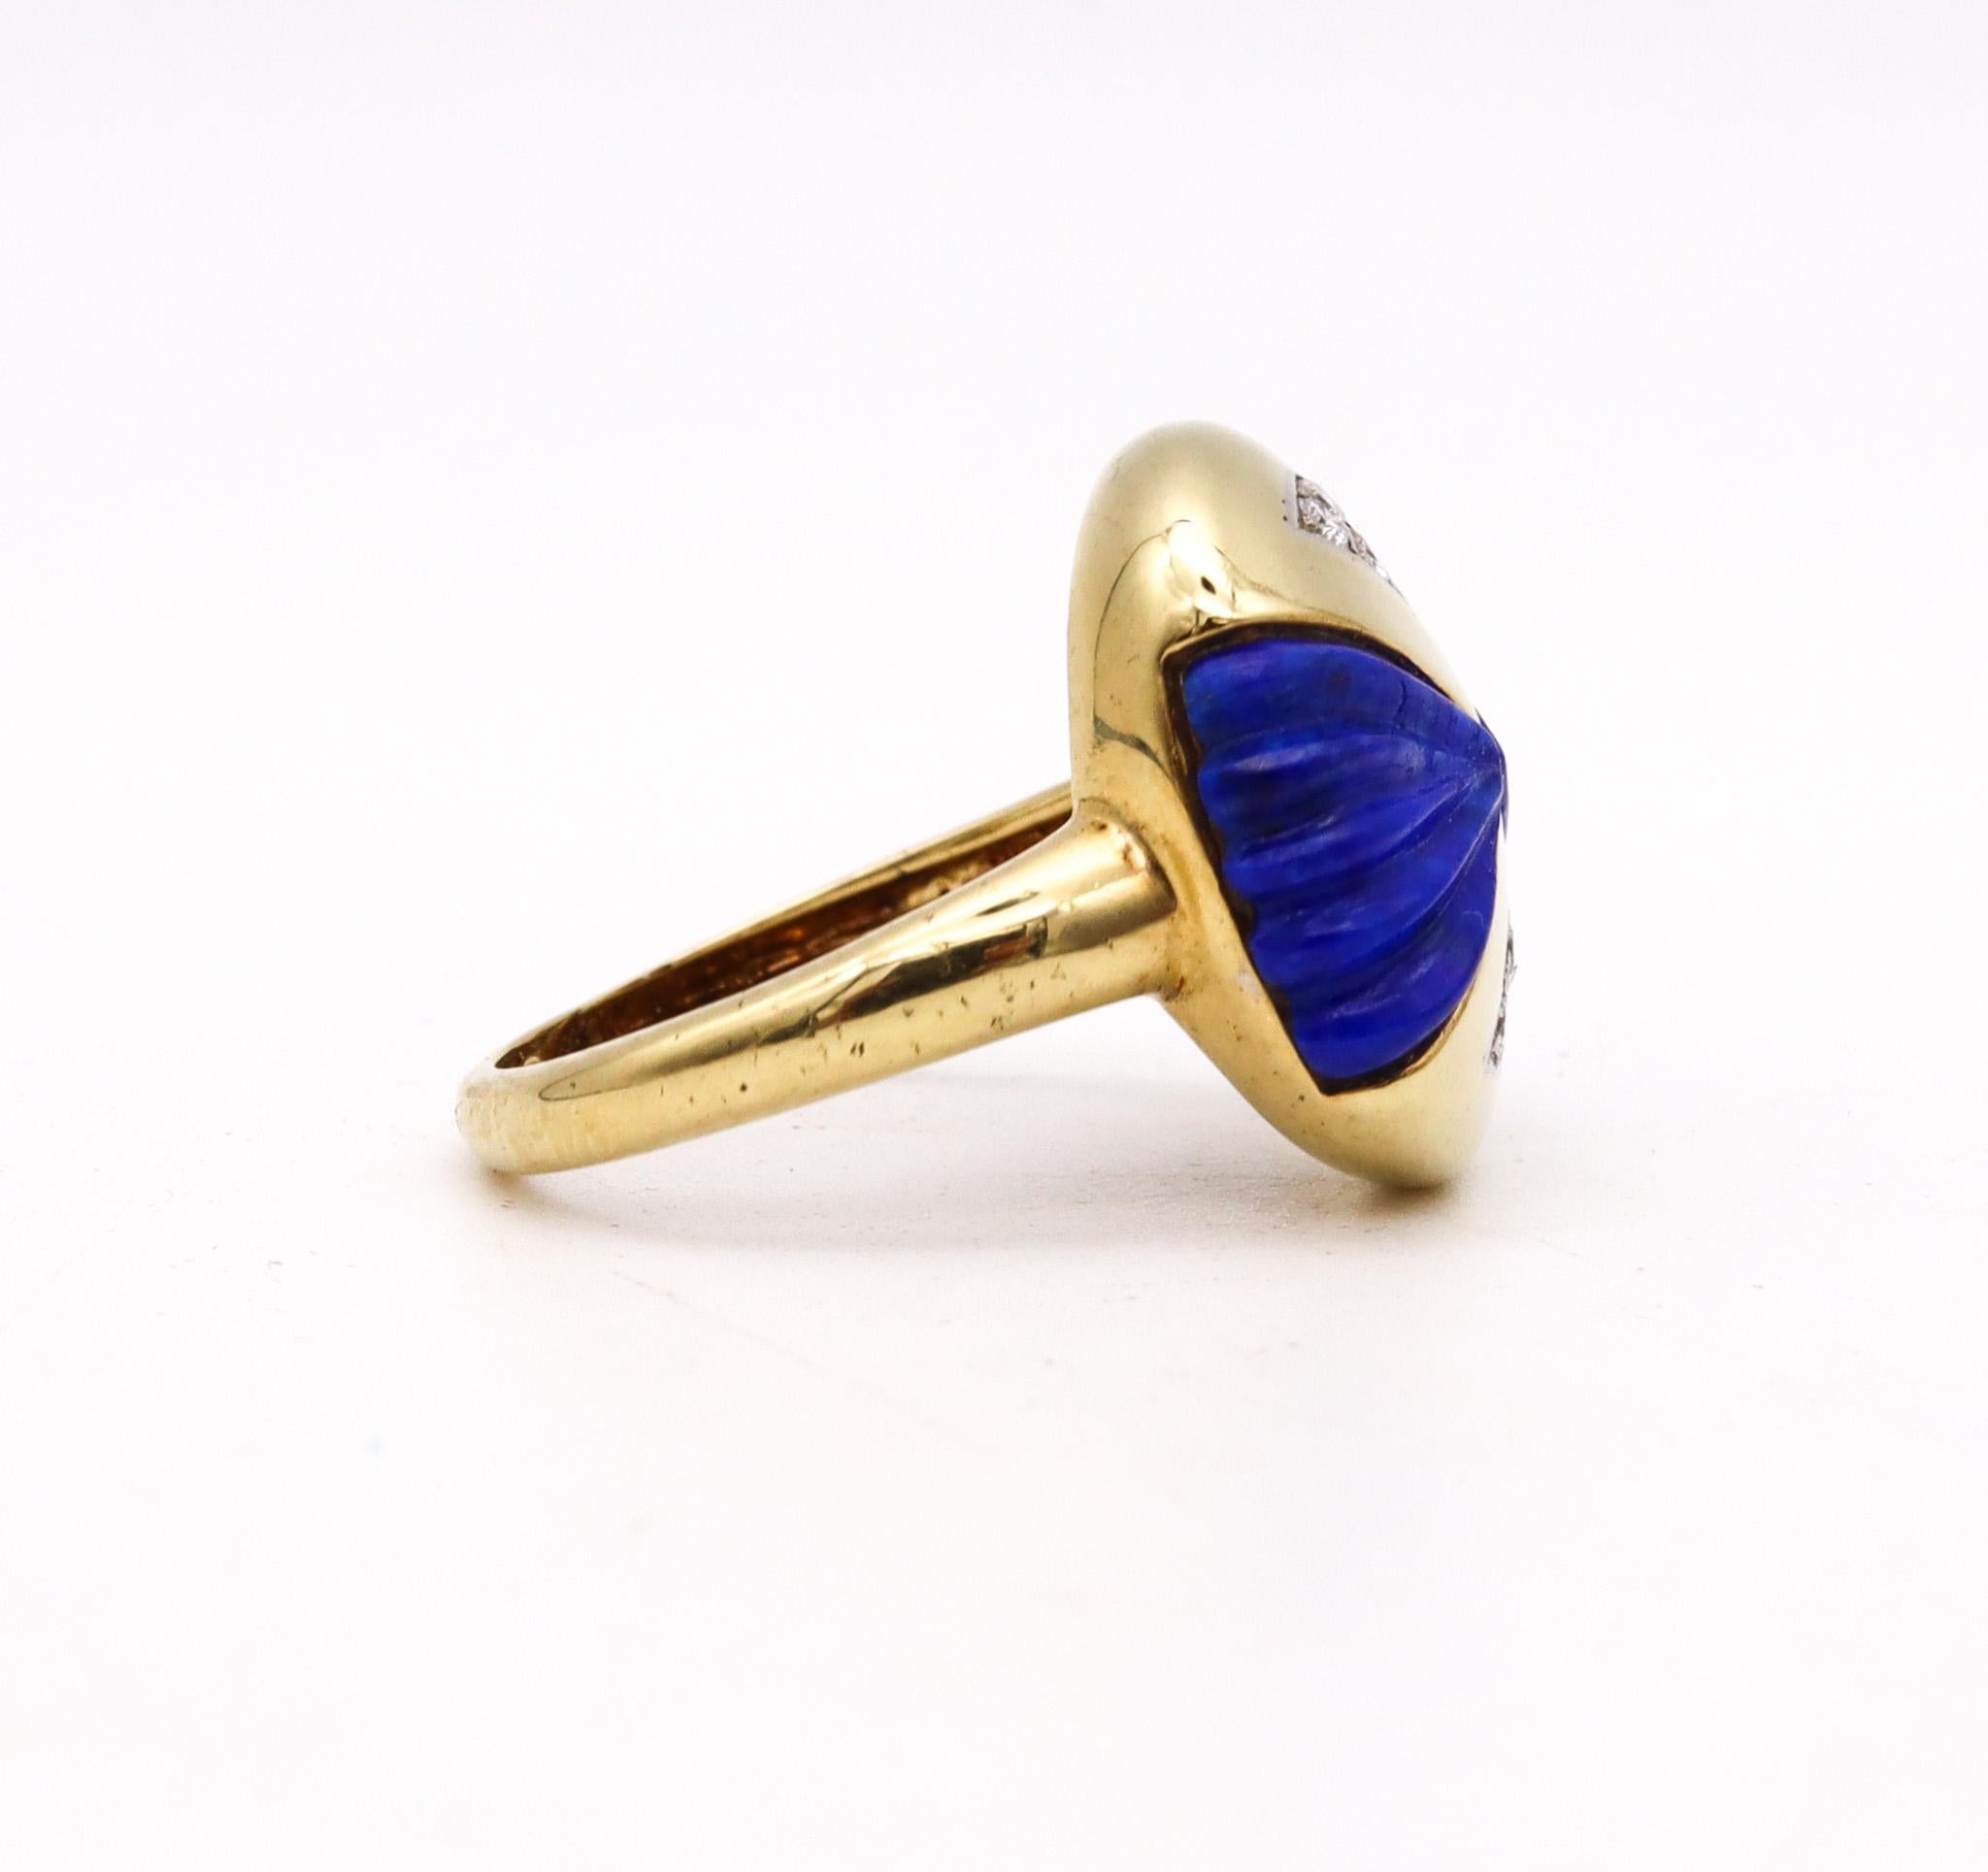 Brilliant Cut Modernist Sculptural Ring In 18Kt Yellow Gold With 3.24 Ctw Diamonds And Lapis For Sale